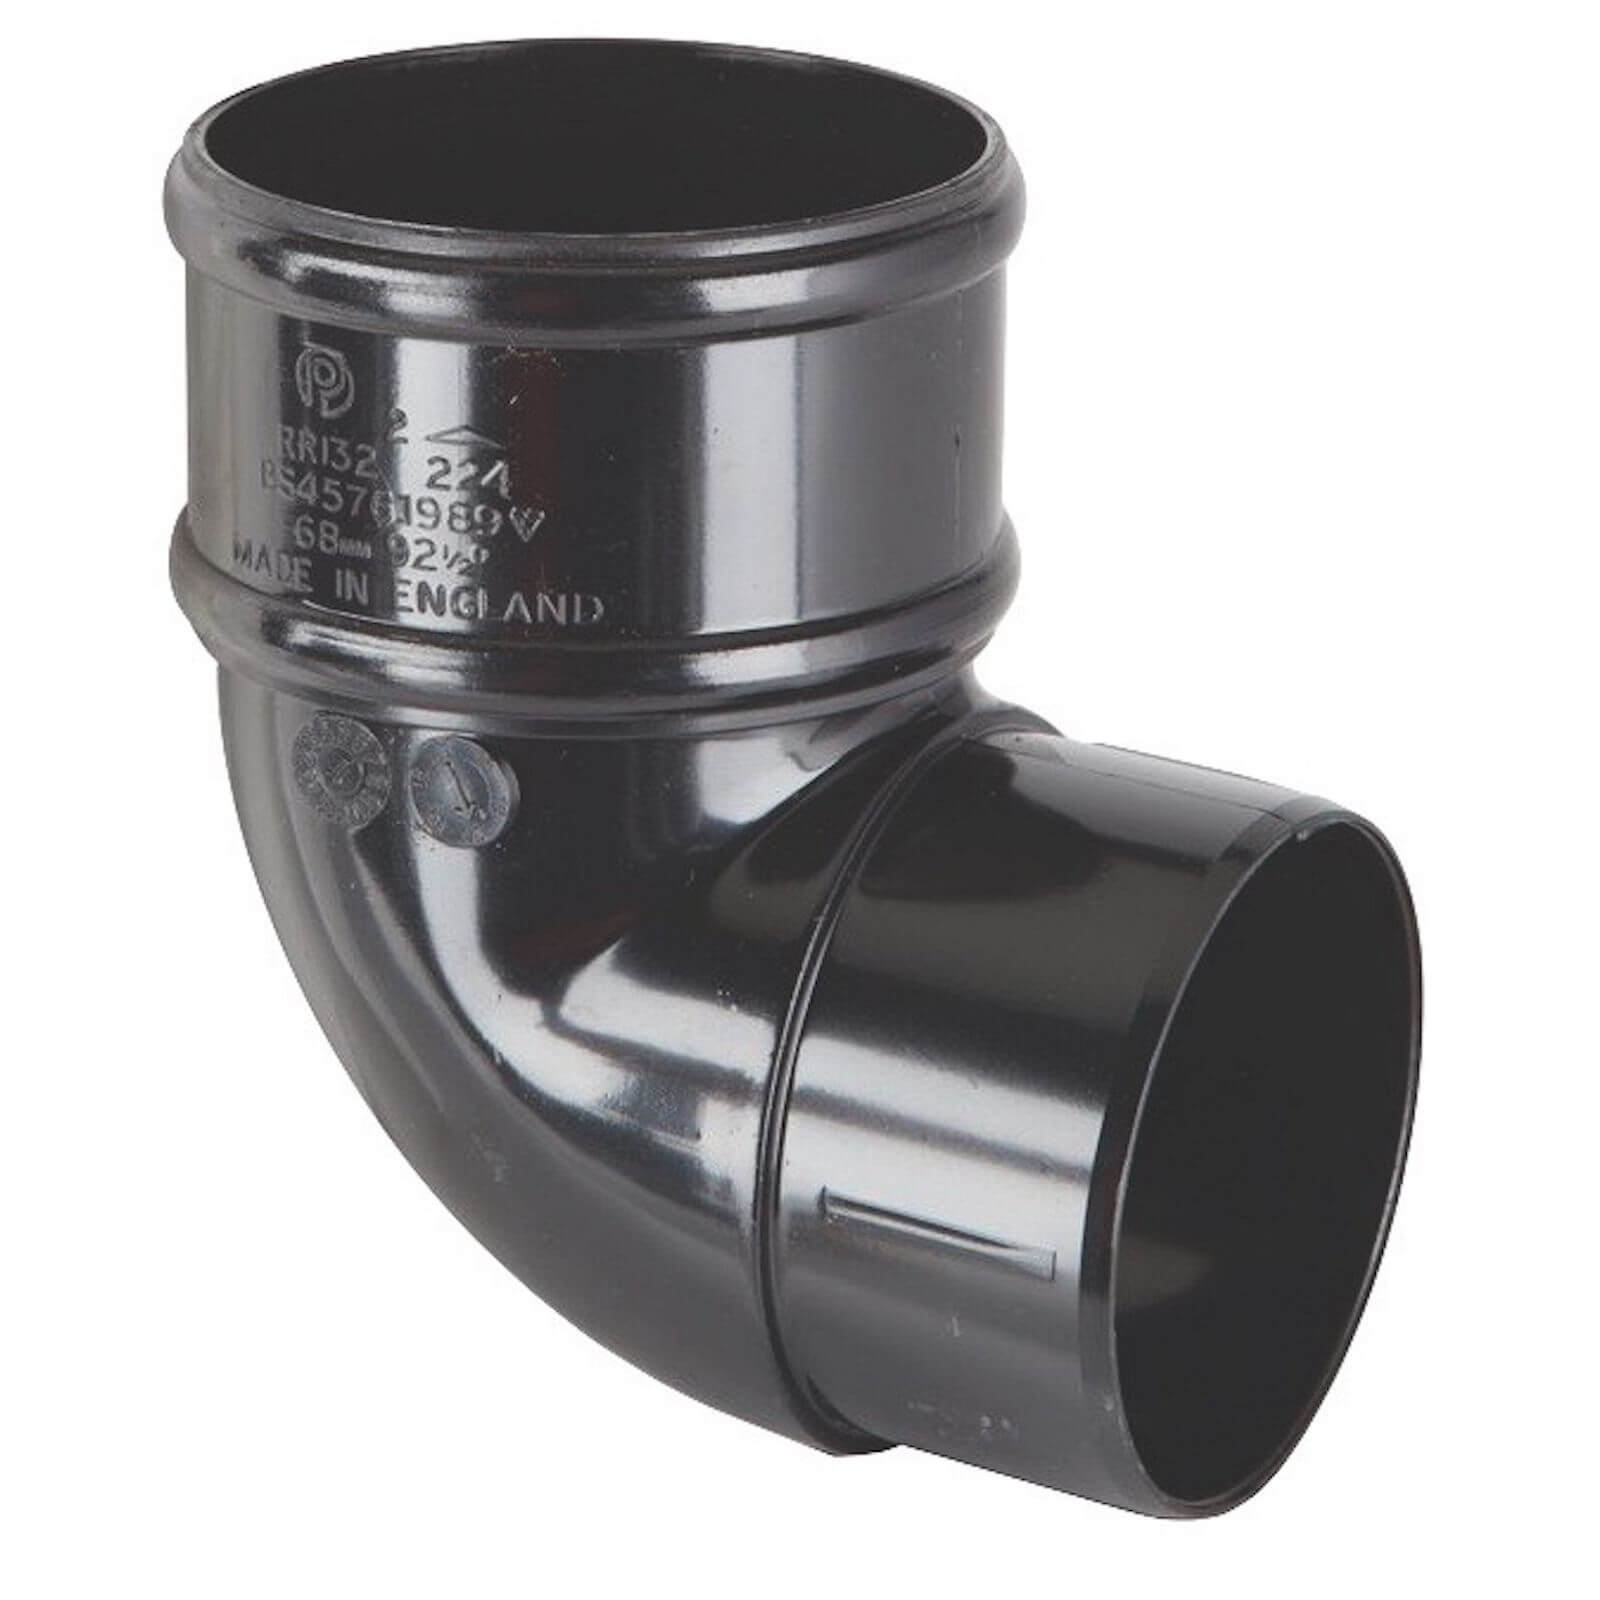 Photo of Polypipe Downpipe Offset Bend - 68mm X 92.5 Degree - Black